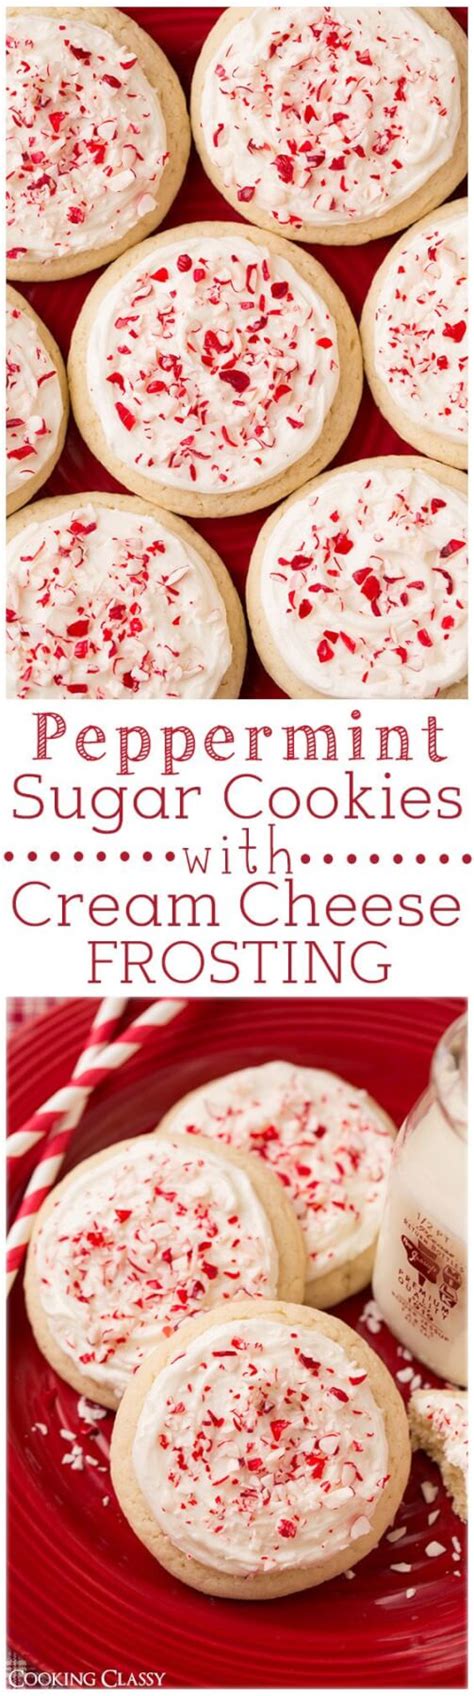 Our list of best christmas cookie recipes has something for everyone, from soft gingerbread cookies to buckeyes with a healthy spin! No-Bake, Mint Gluten-Free Chocolate Lasagna Recipe - My Natural Family | Recipe | Holiday ...